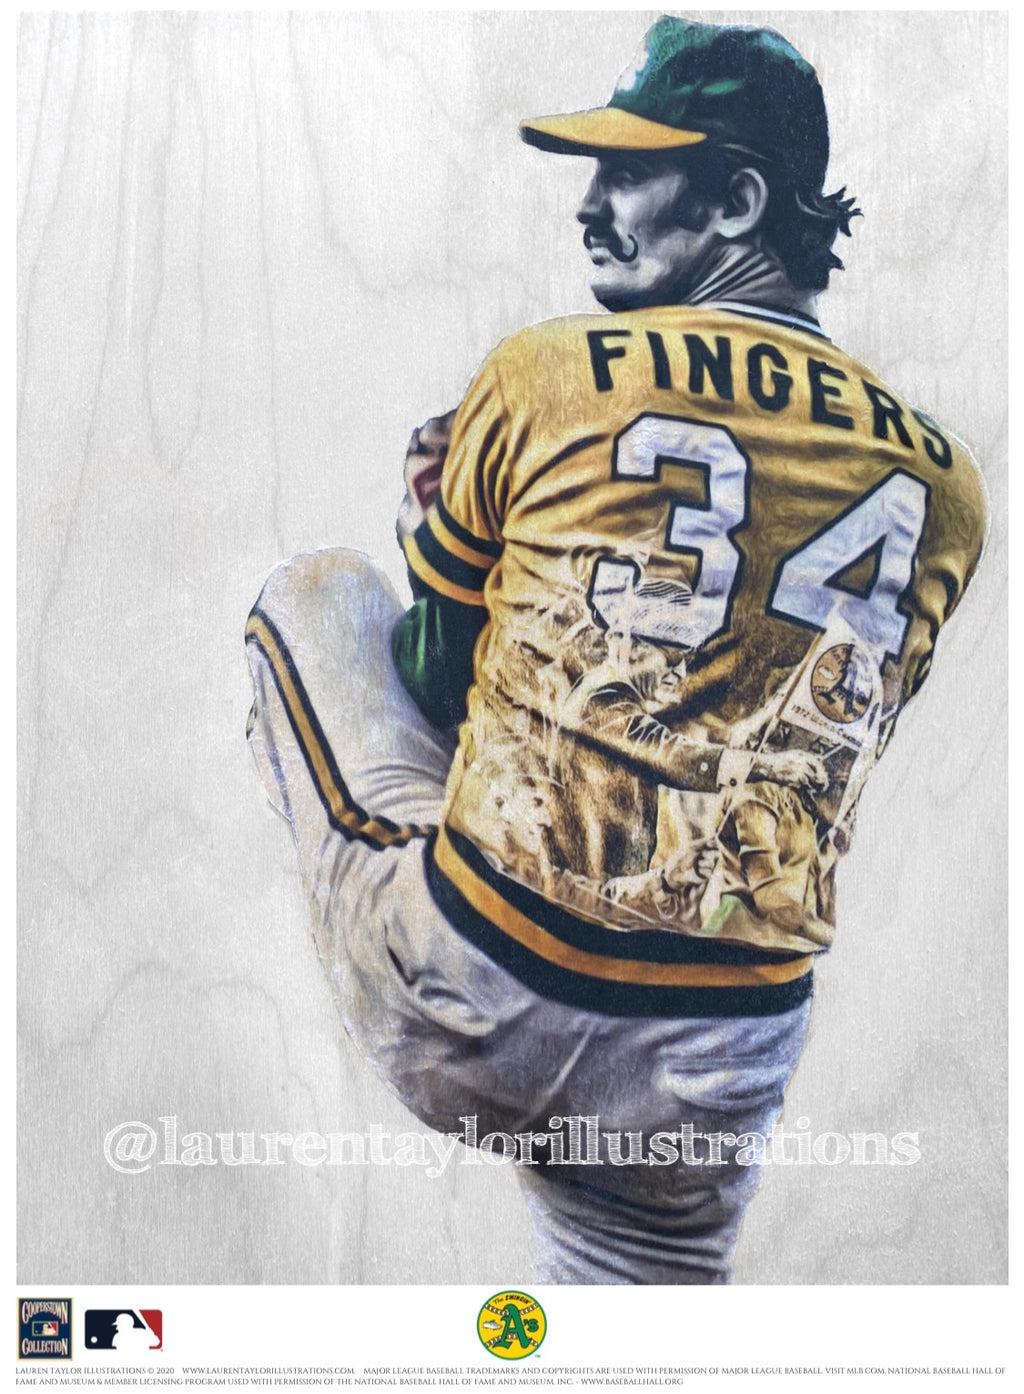 "Rollie" (Rollie Fingers) Oakland Athletics - Officially Licensed MLB Cooperstown Collection Print - Limited Release